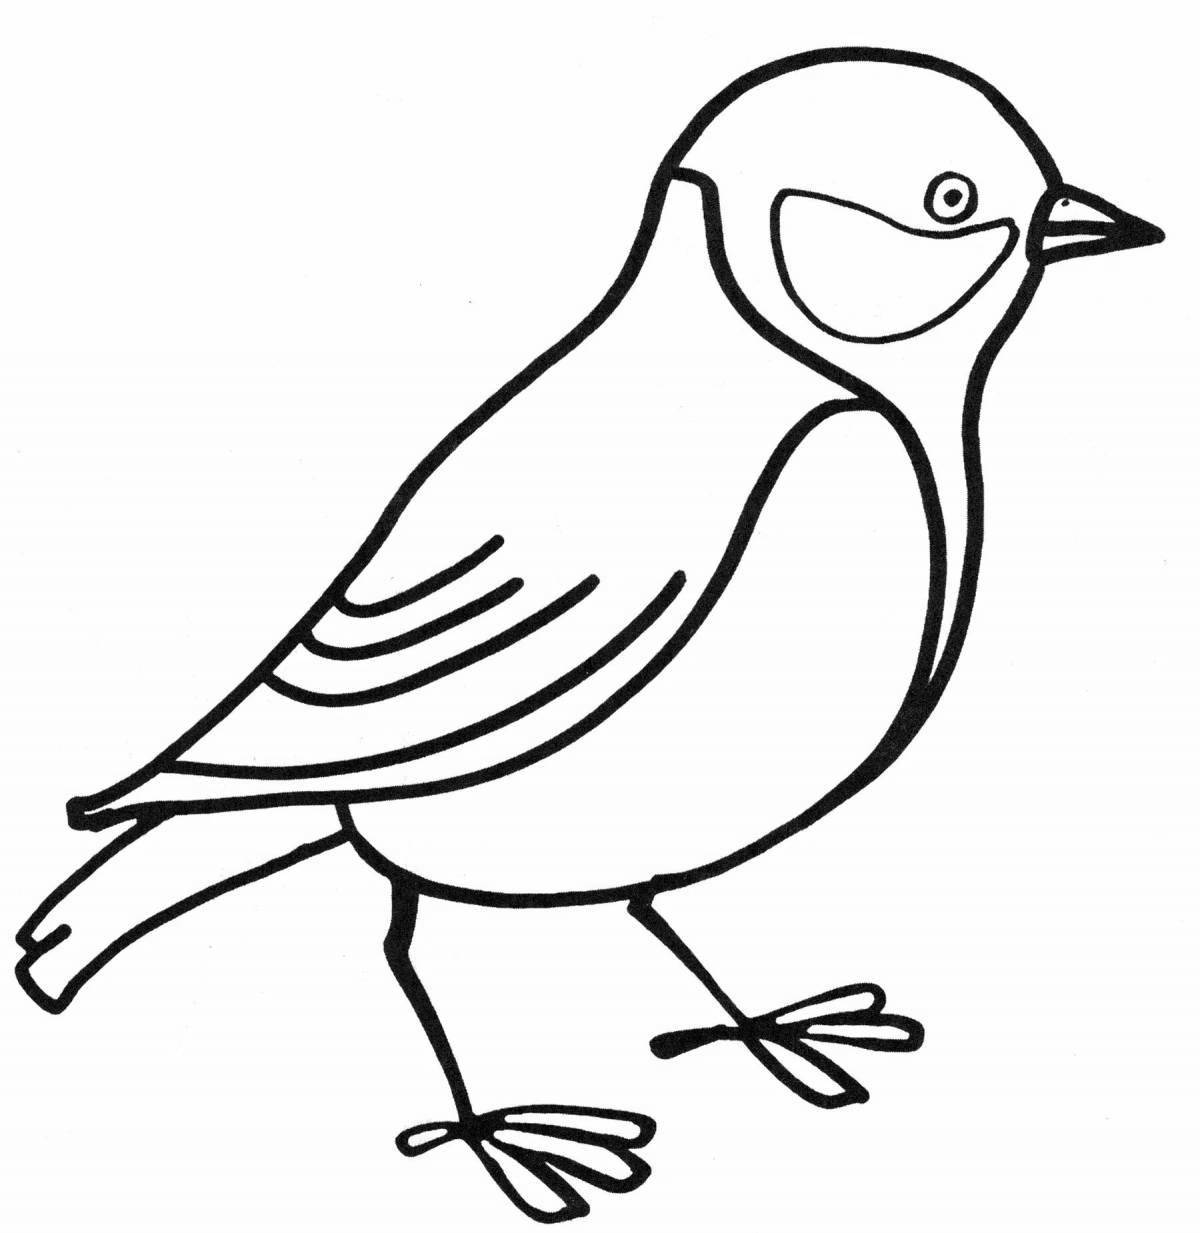 Shiny Tit coloring page